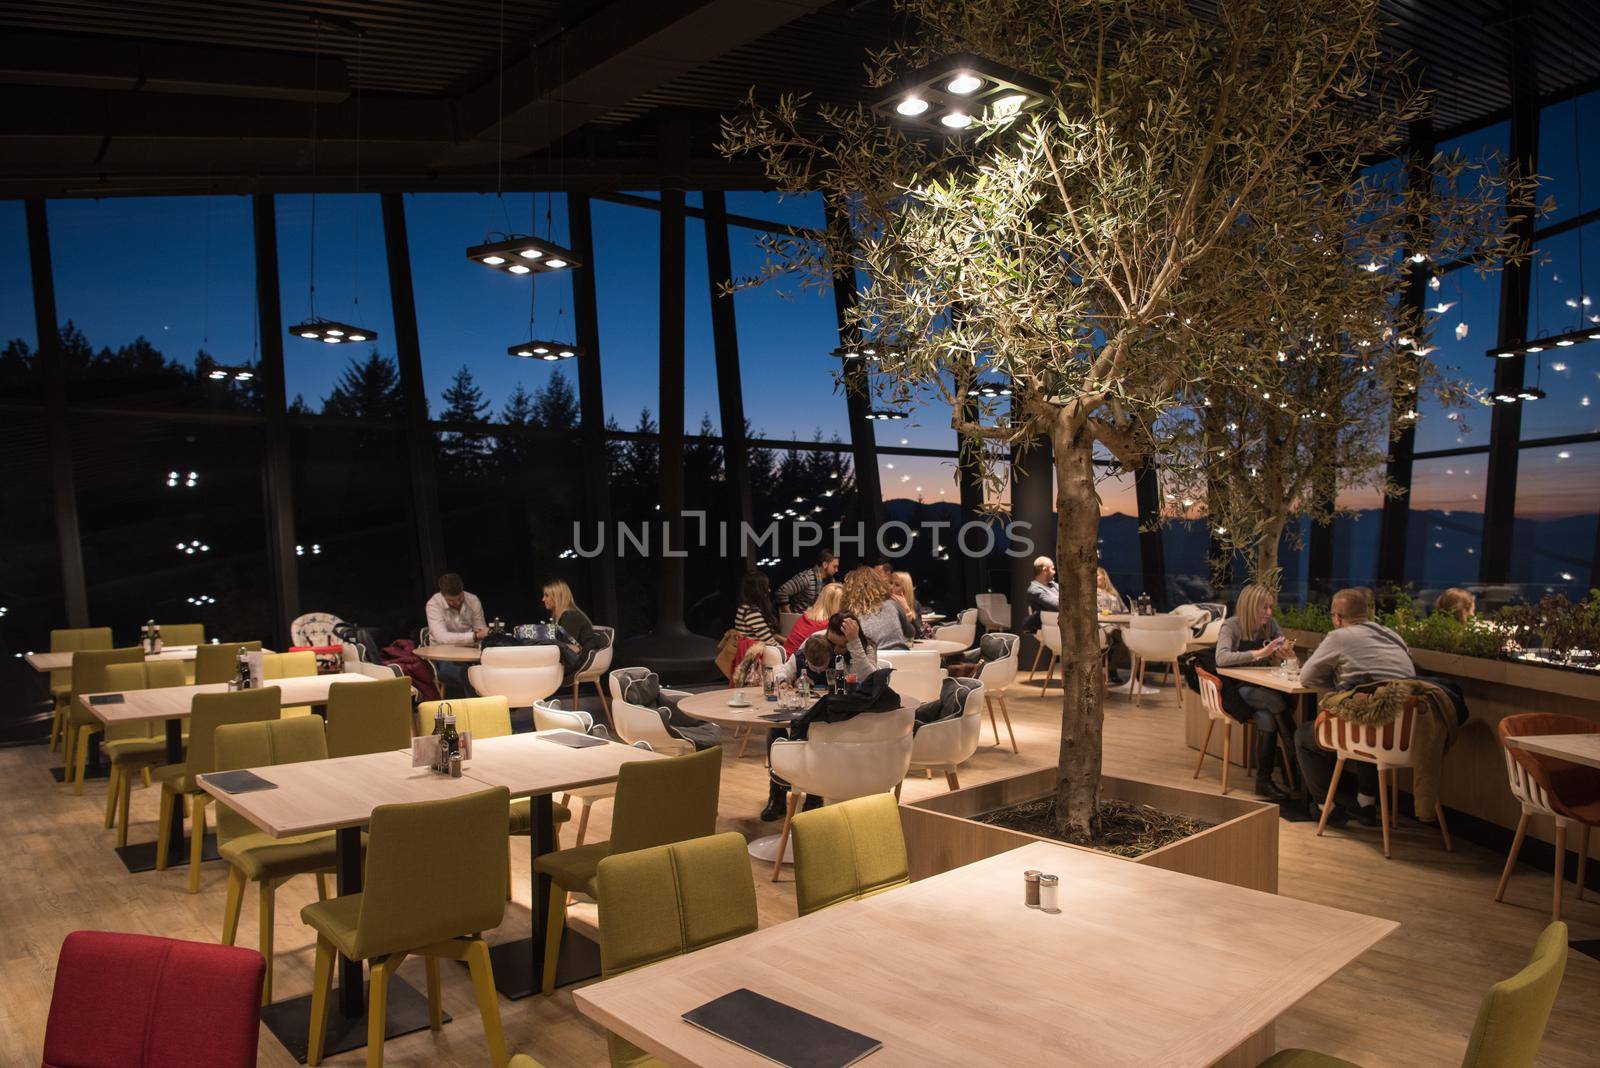 People enjoy in the lovely evening at a luxury restaurant